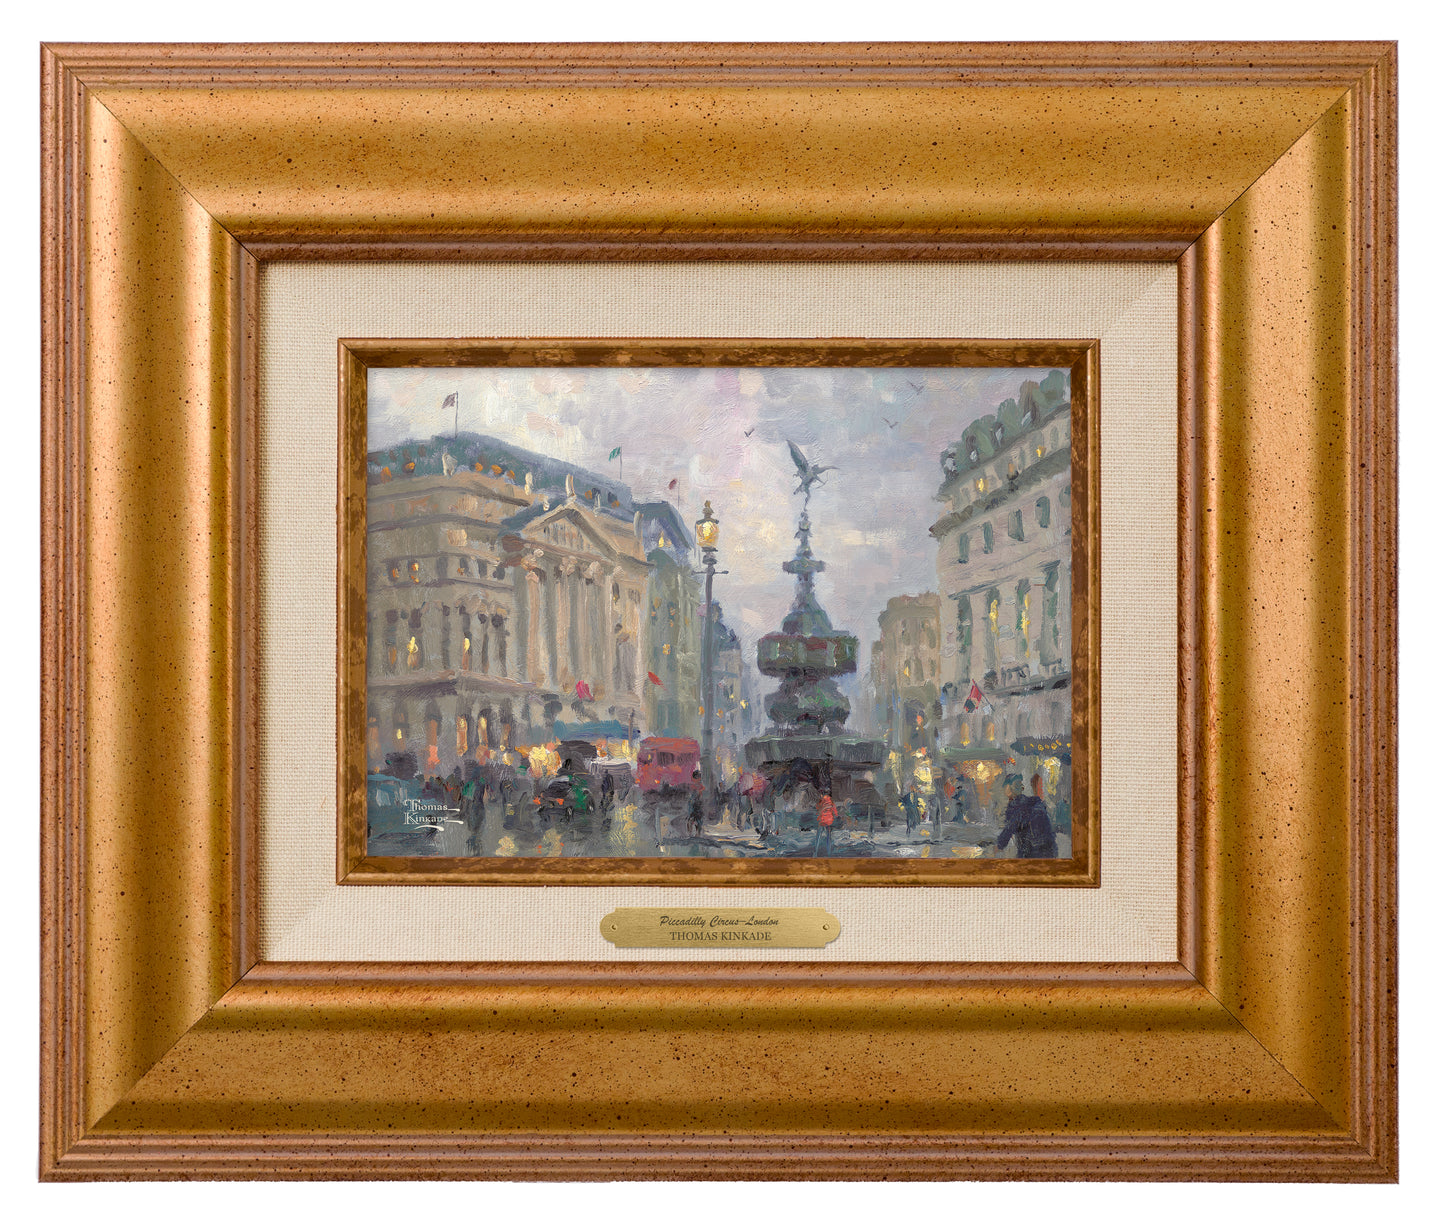 162211_BRW Picadilly Circus 5X7 - Golden Sunset Frame.jpg